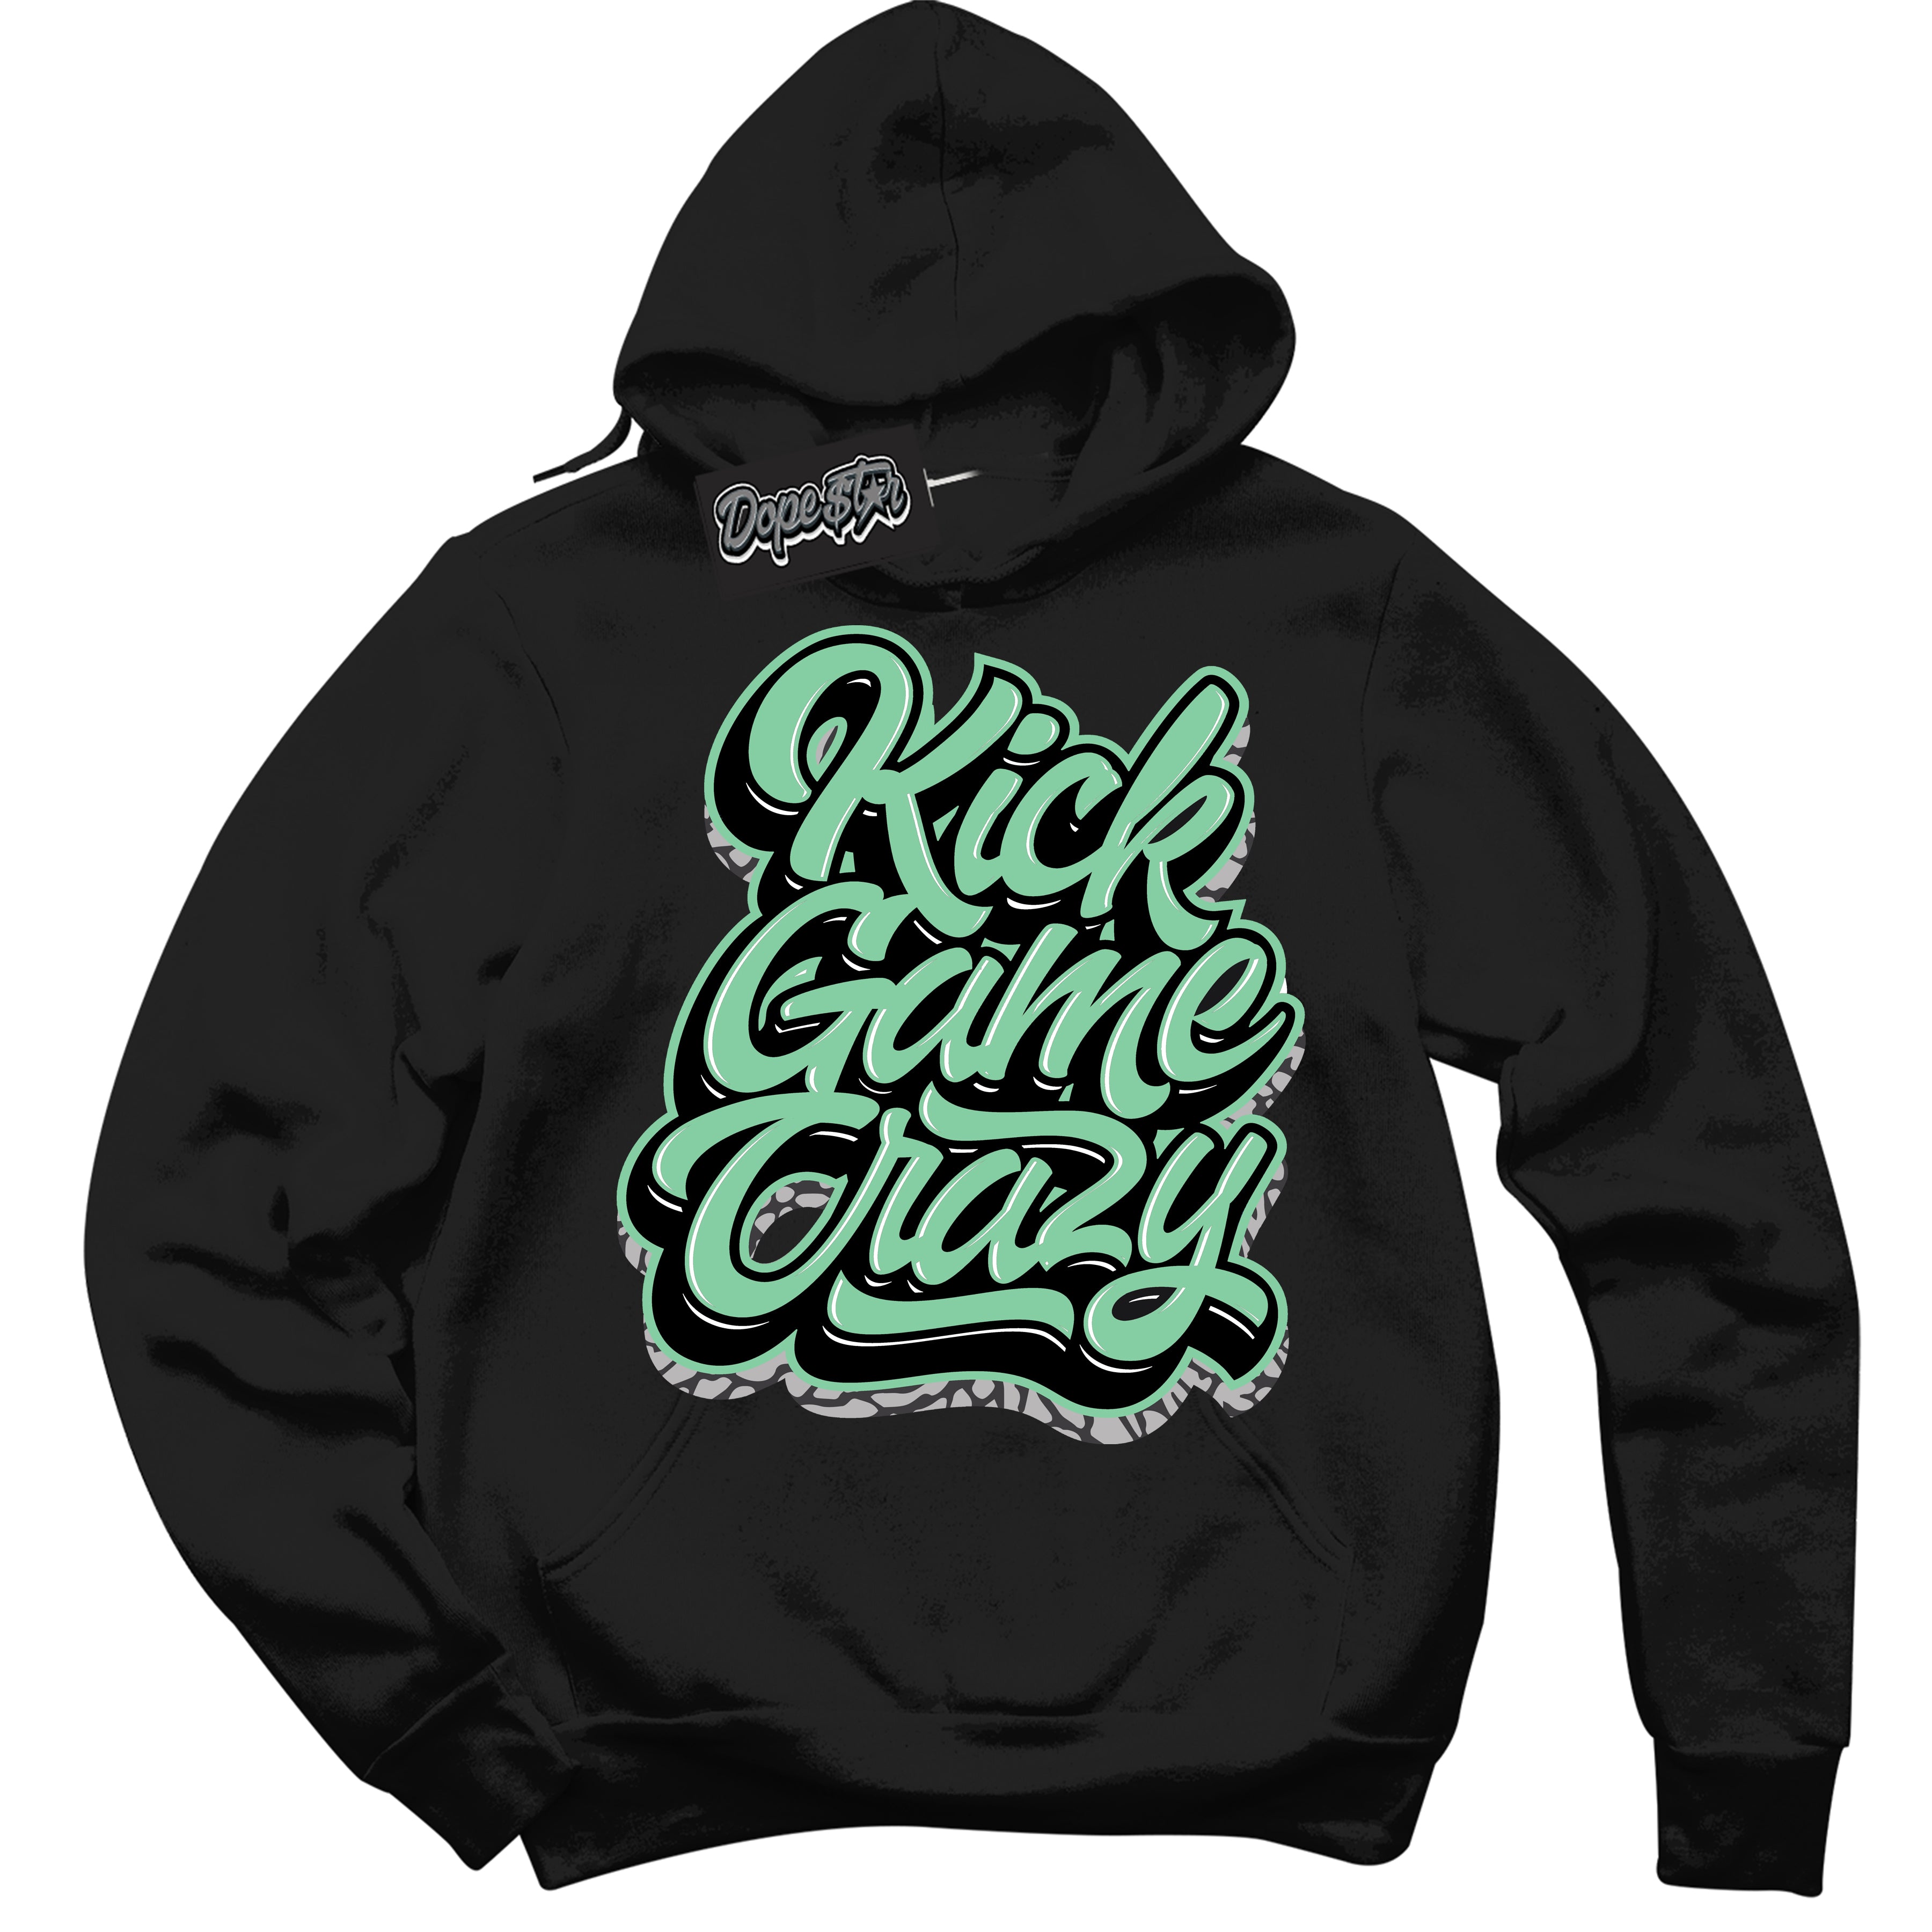 Cool Black Graphic DopeStar Hoodie with “ Kick Game Crazy “ print, that perfectly matches Green Glow 3S sneakers